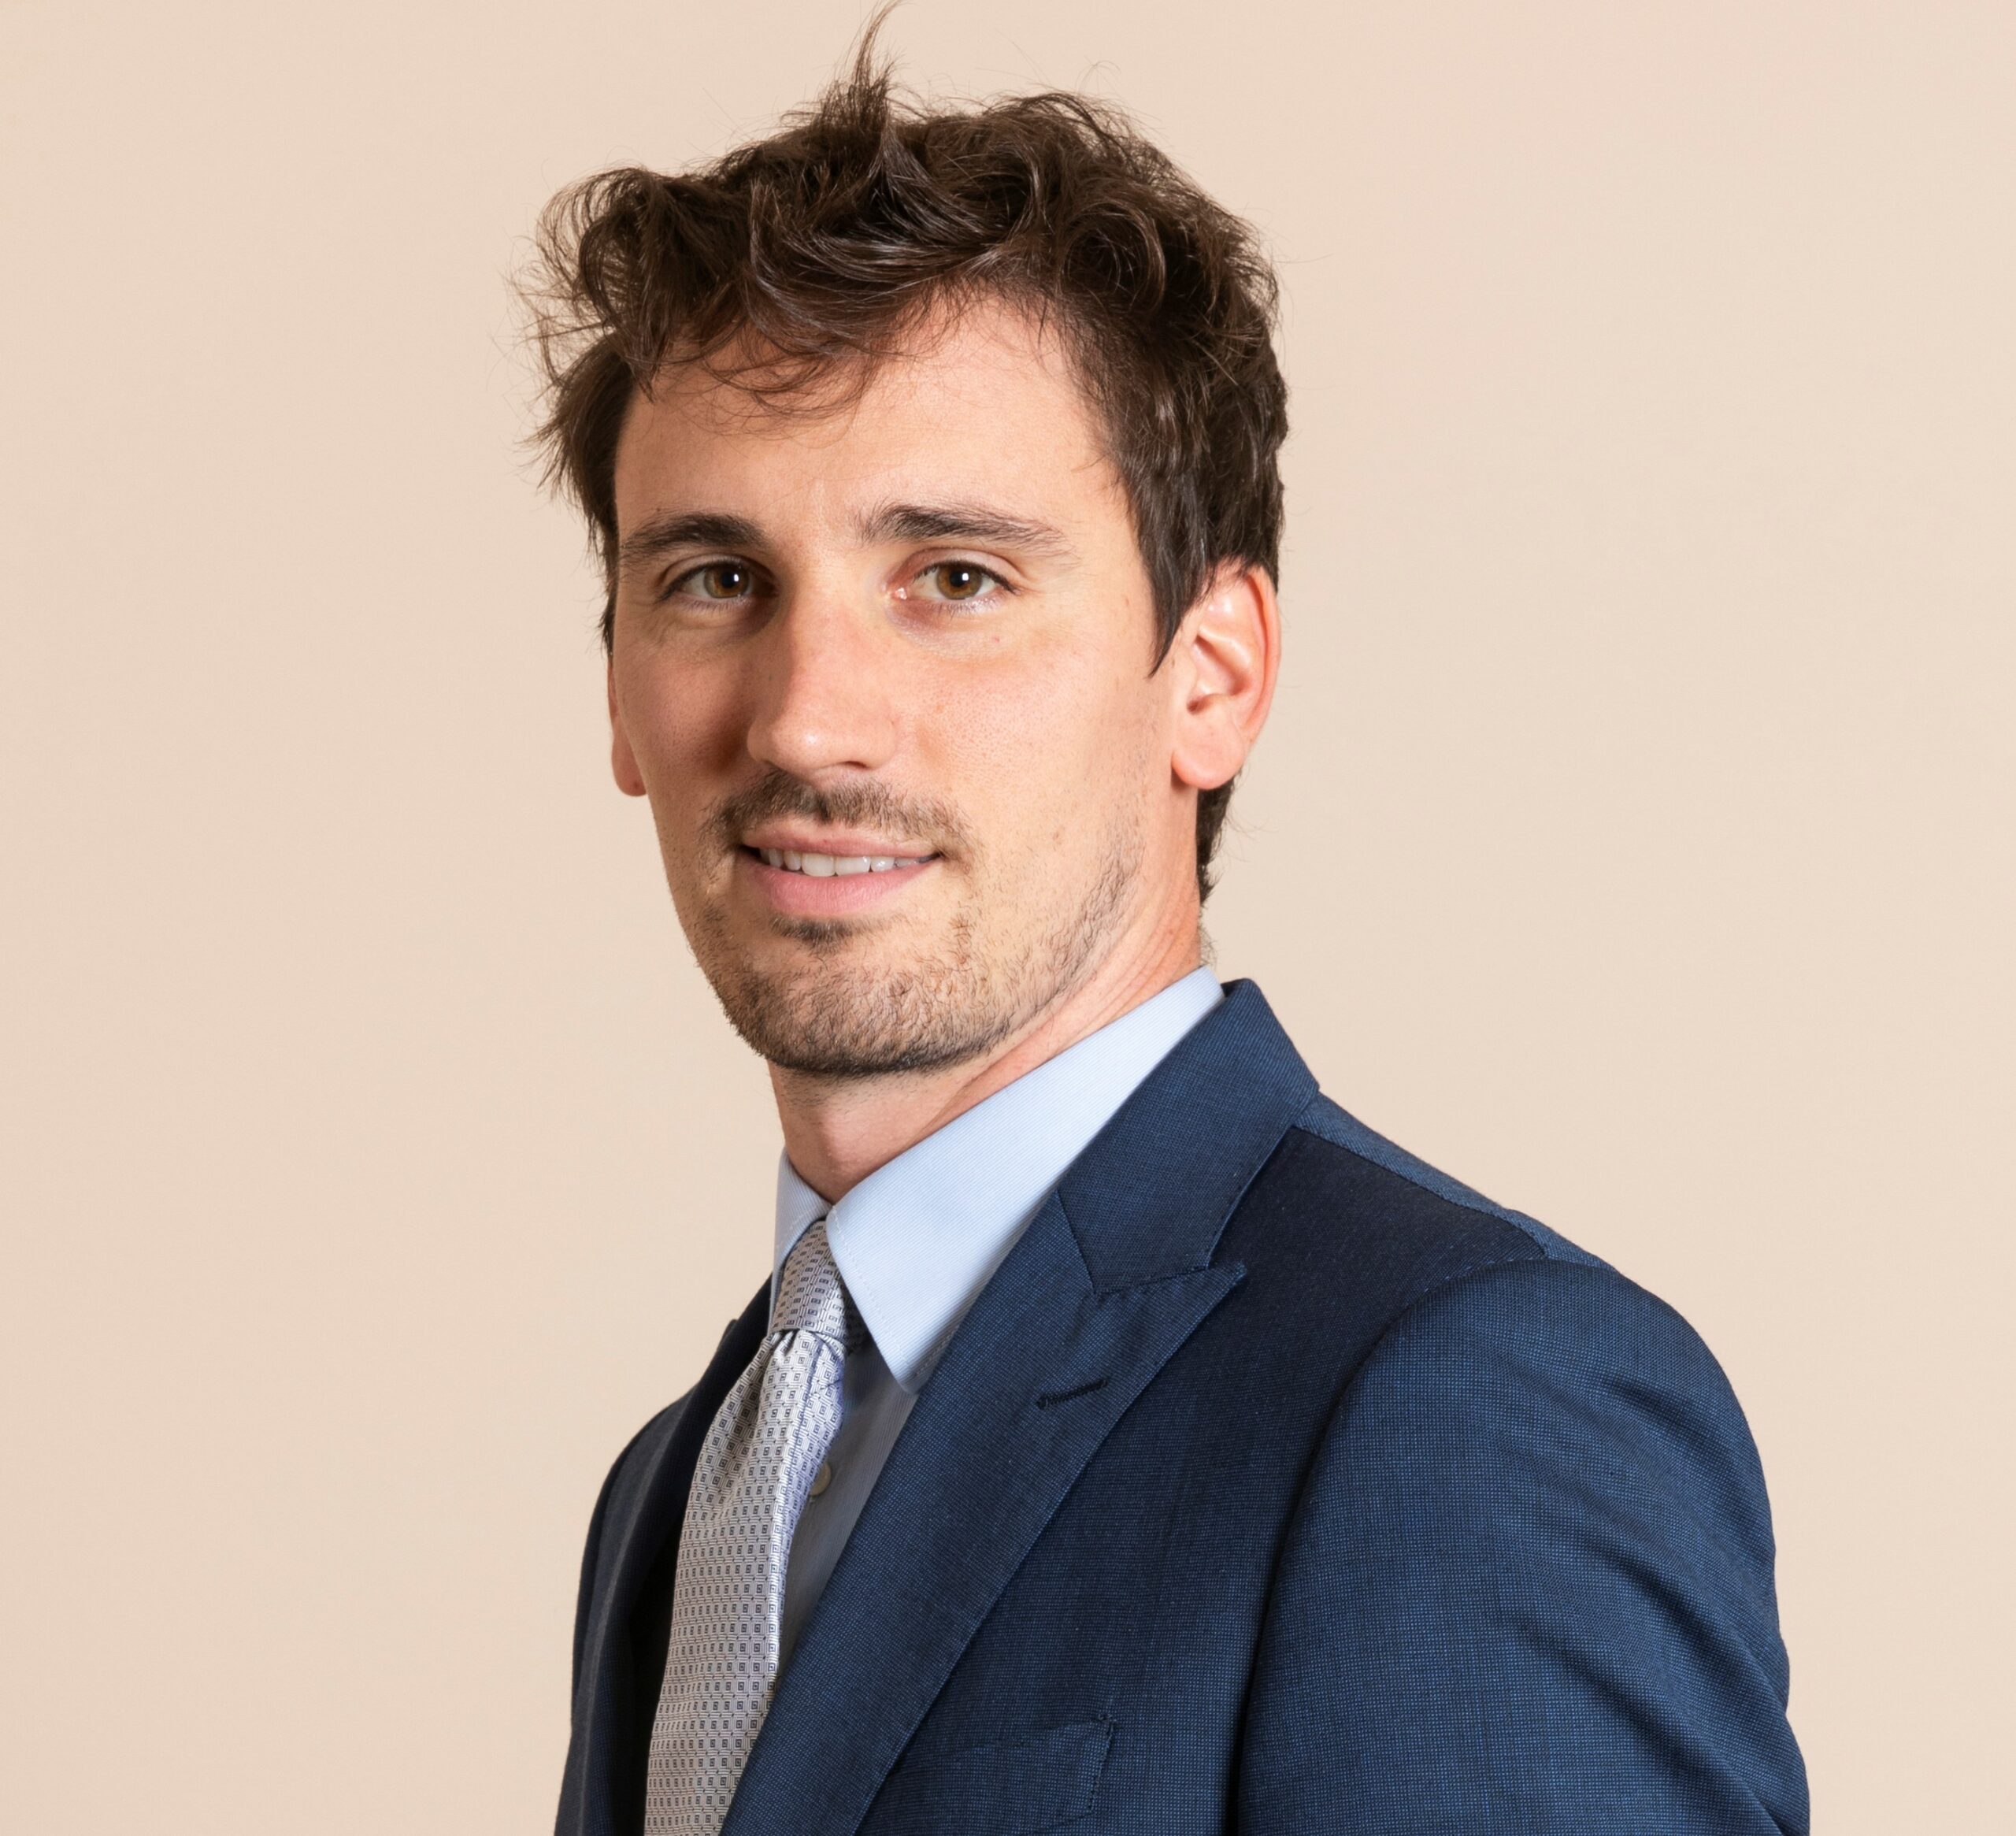 <span style='line-height: 0.6'>Luca Bestetti</span><br />
<span style='color:#00b5e2;font-size:25px;line-height: 0.6 !important;'><br />
Fund Manager</span>